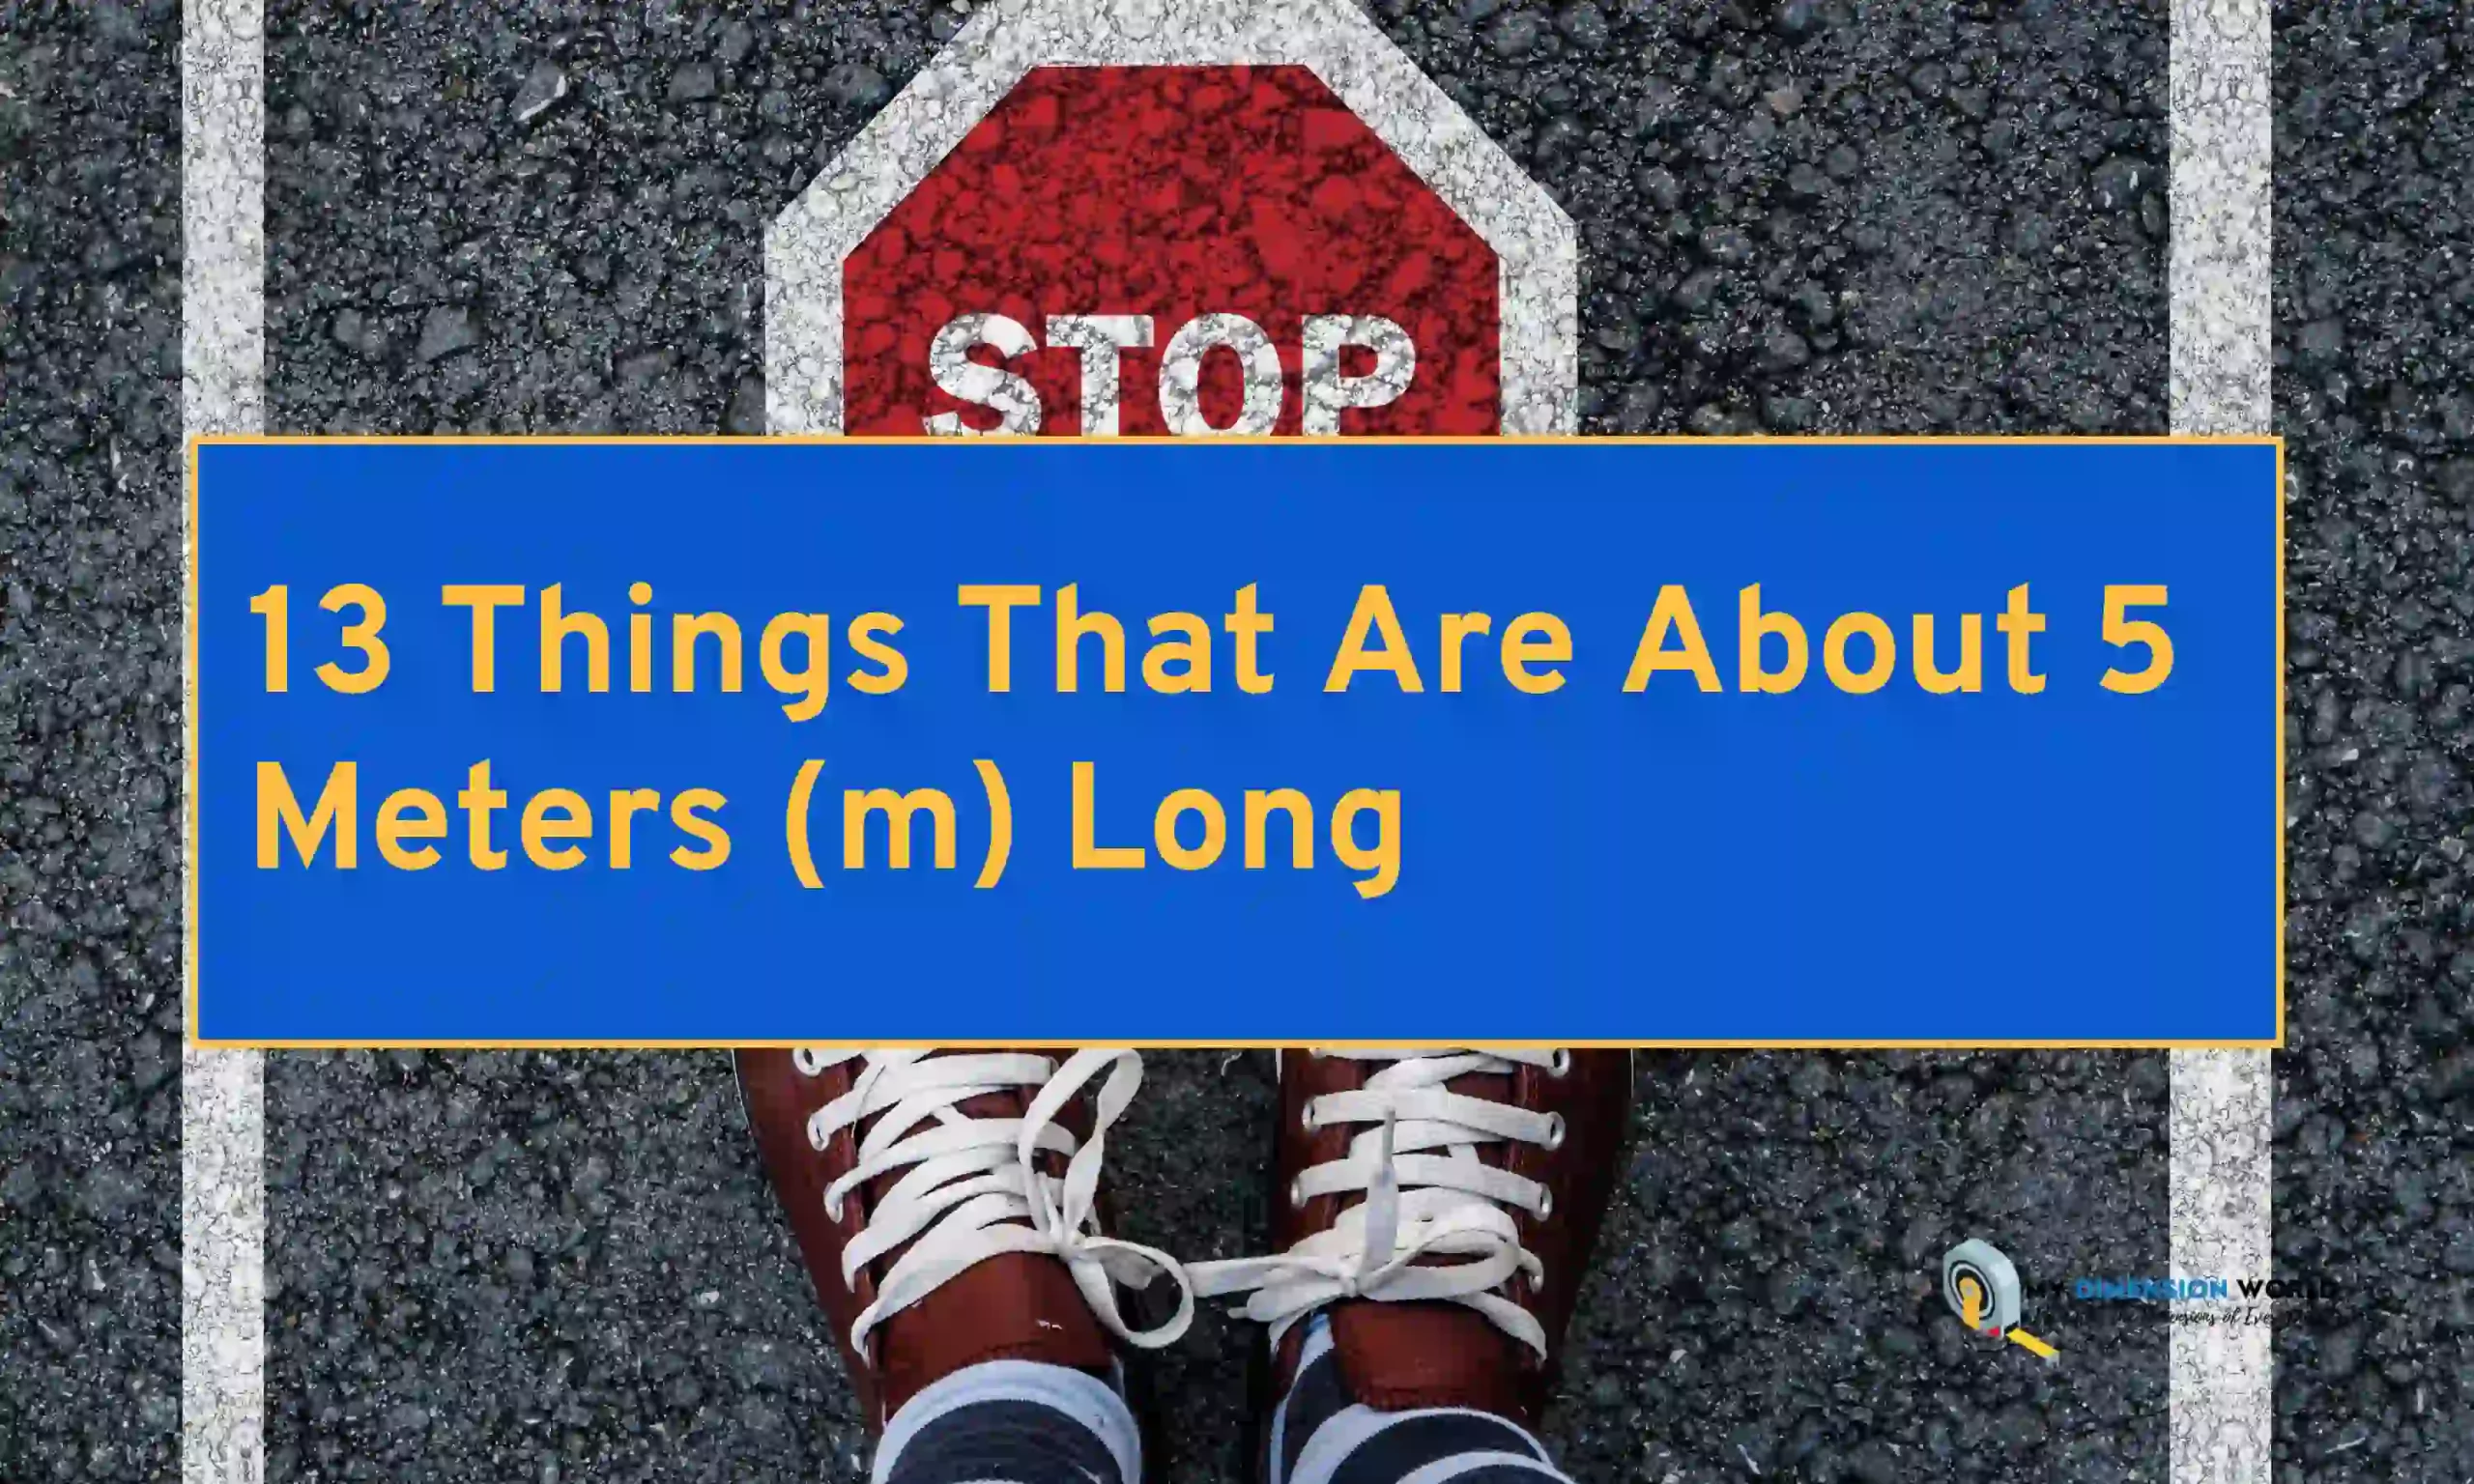 13 Things That Are About 5 Meters (m) Long